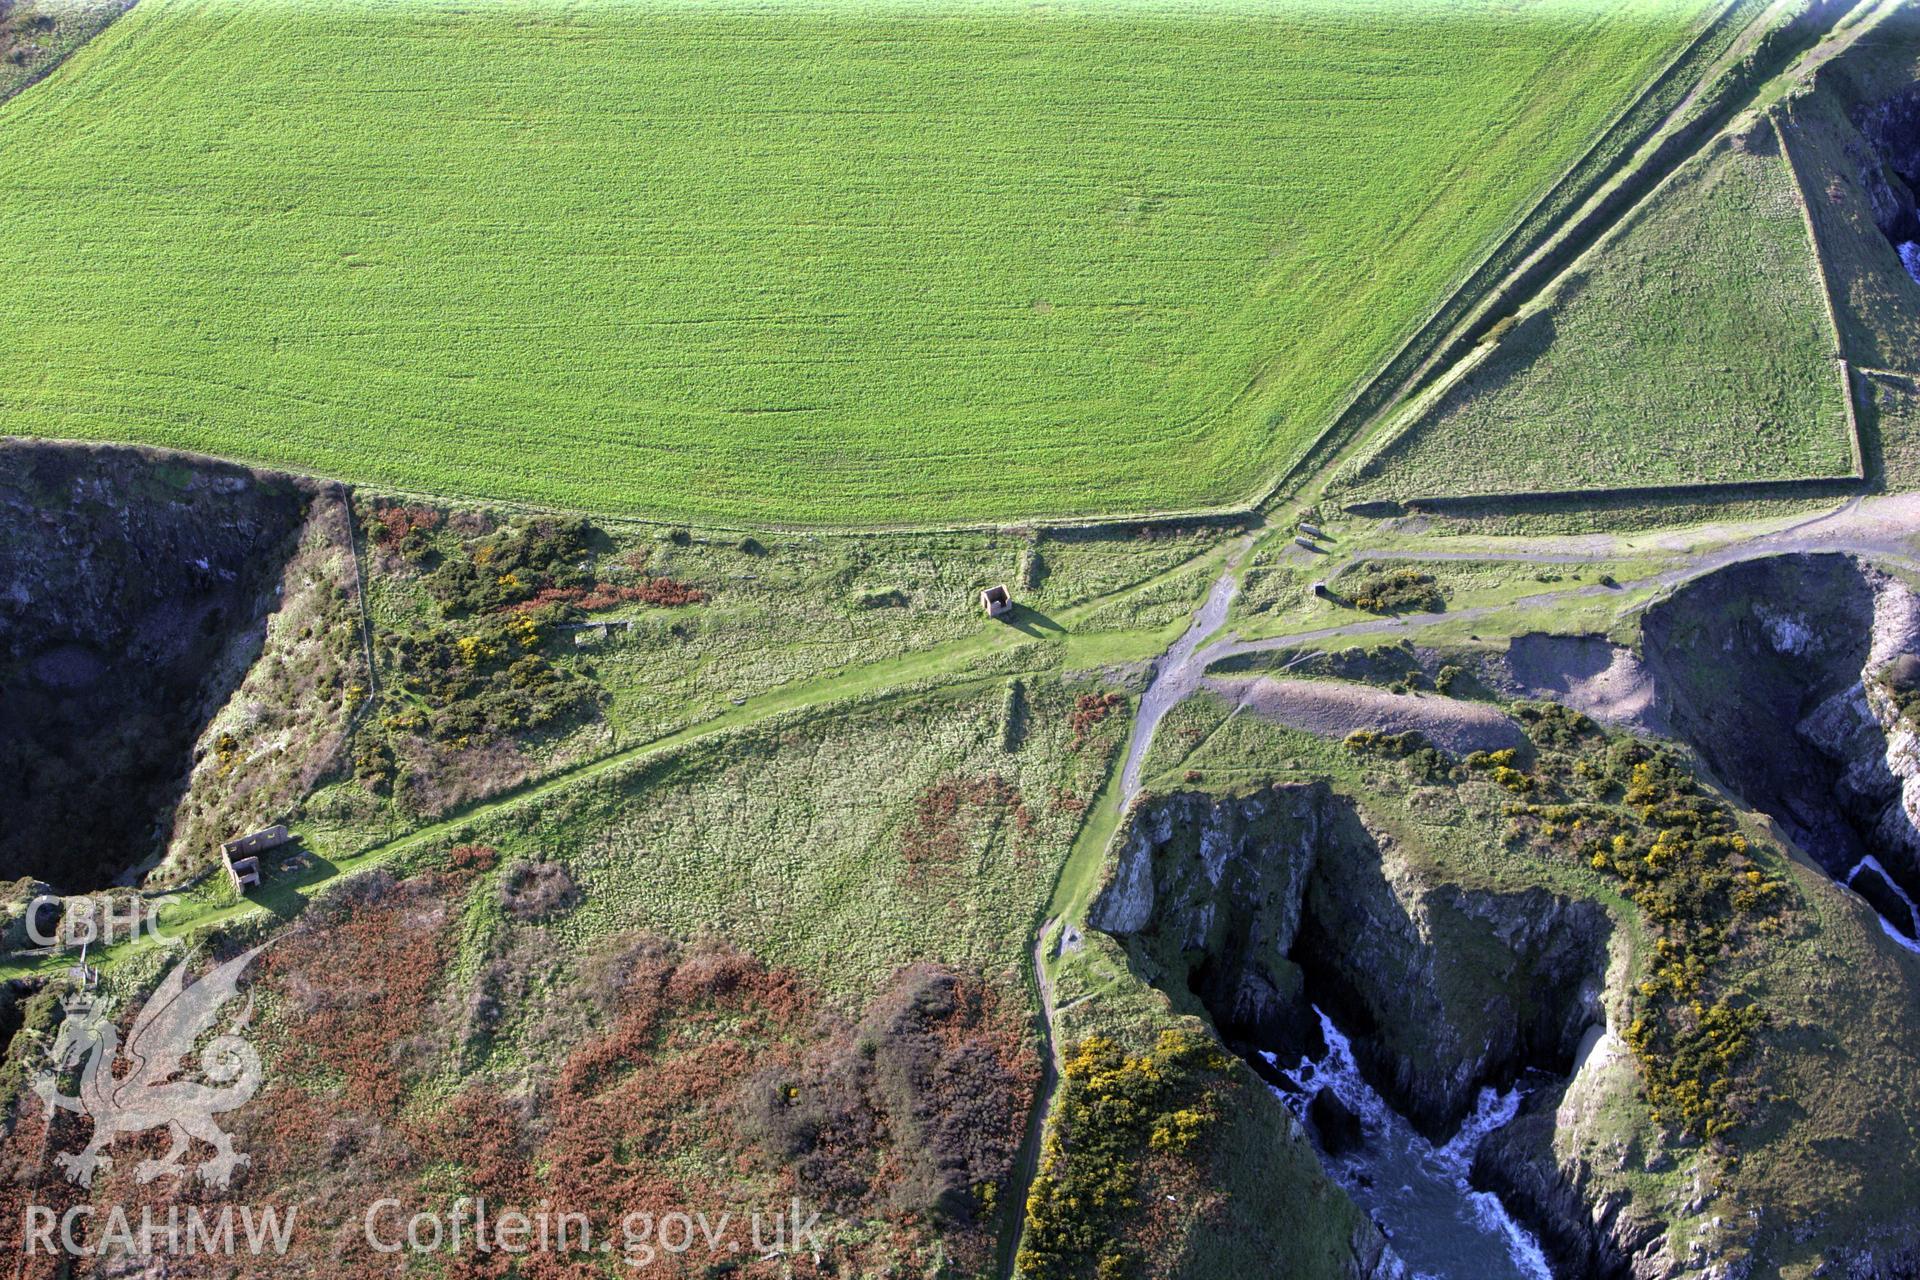 RCAHMW colour oblique photograph of tramway, Porth-gain, viewed from the east. Taken by O. Davies & T. Driver on 22/11/2013.